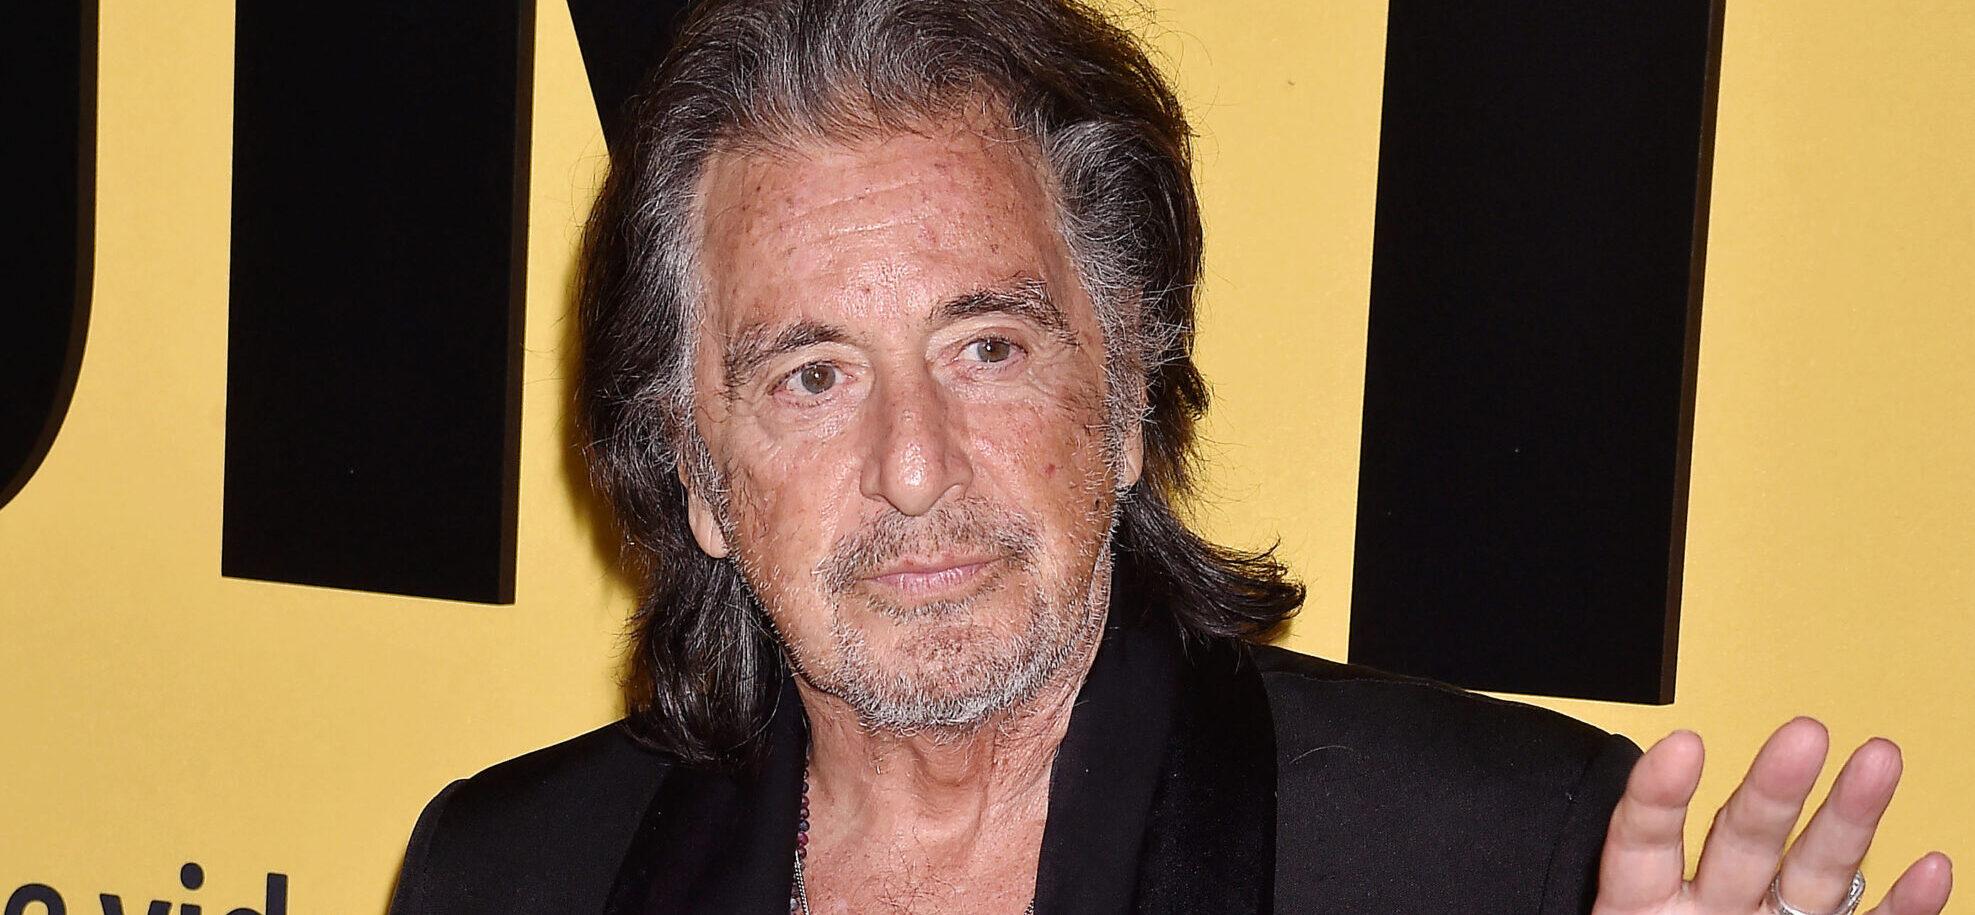 Al Pacino Agrees To Keep Custody Battle Over Infant Son Private